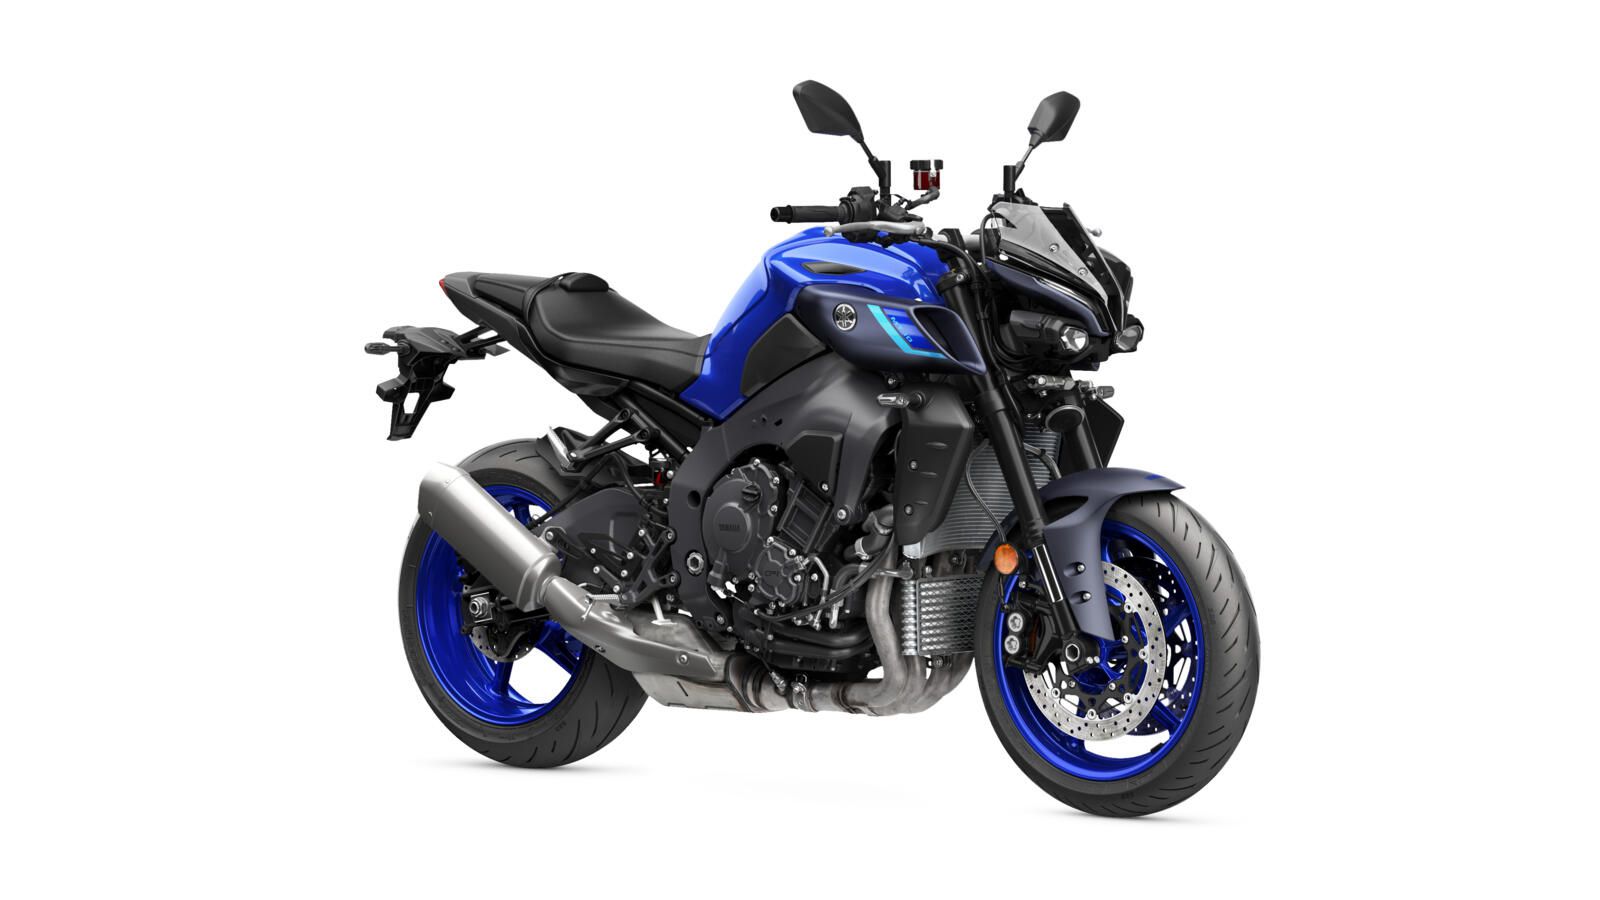 The 2022 Yamaha MT-10 in Icon Blue colorway.